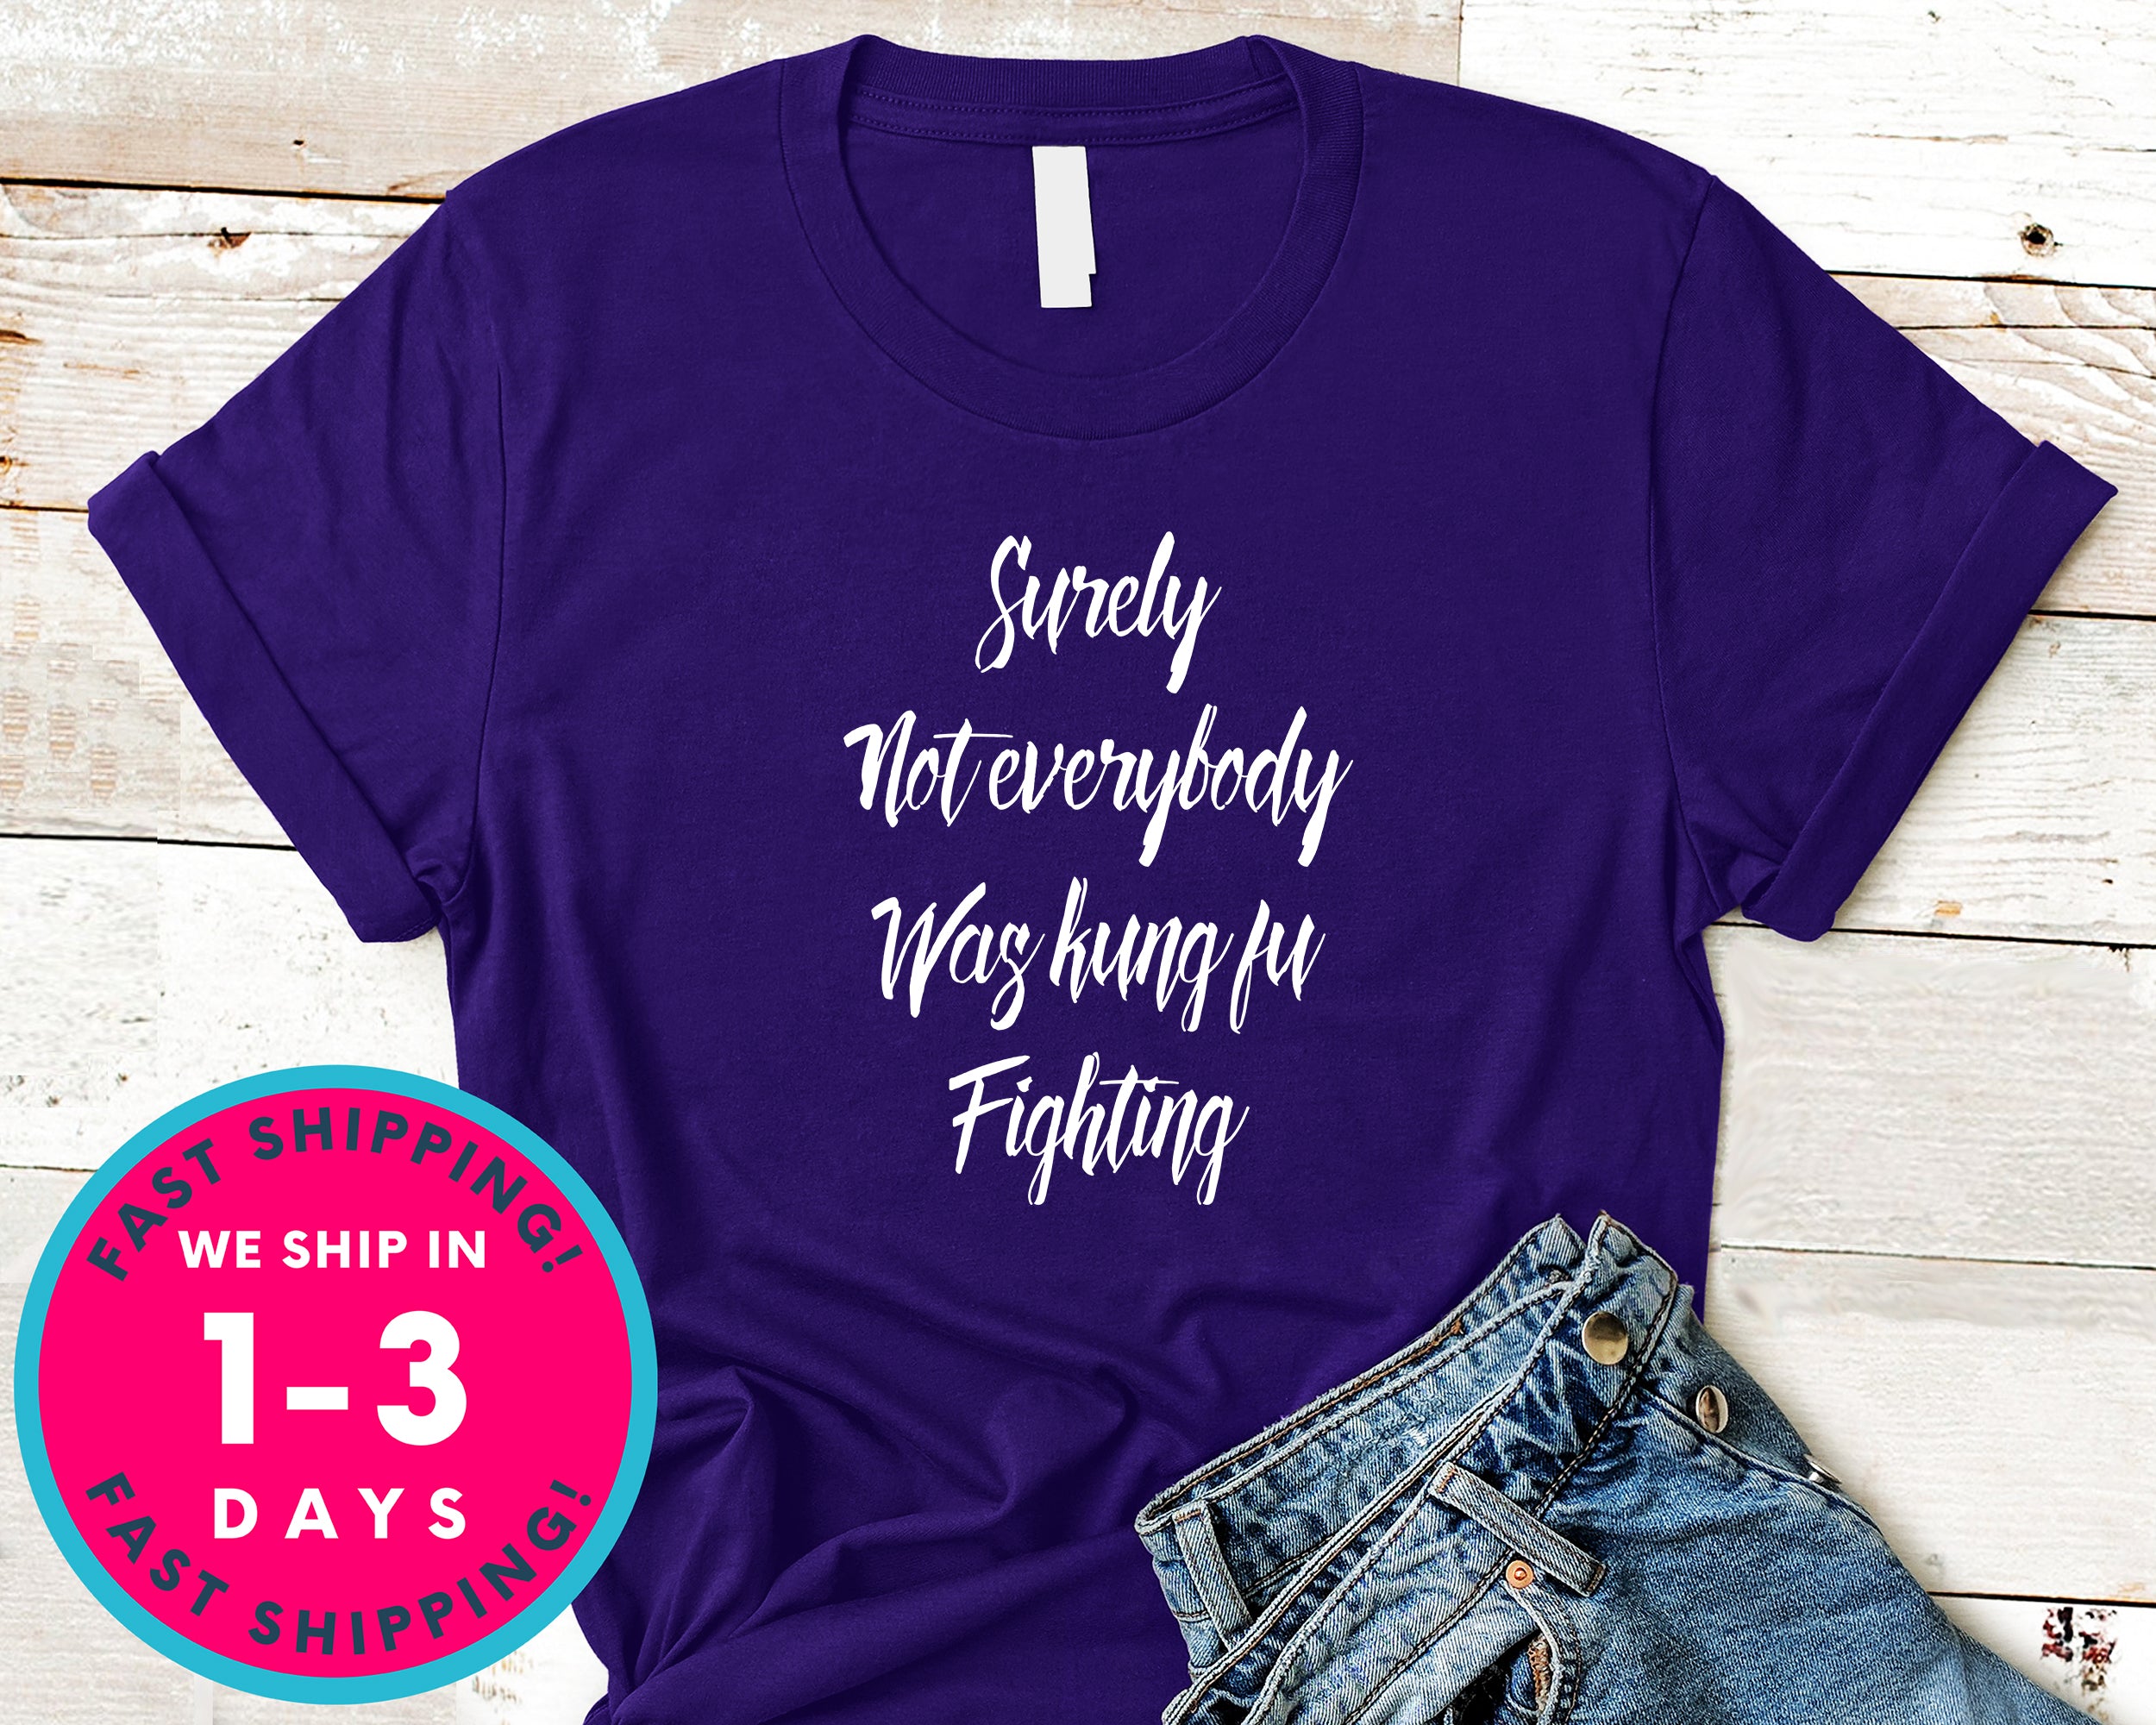 Surely Not Everybody Was Kung Fu Fighting T-Shirt - Funny Humor Shirt